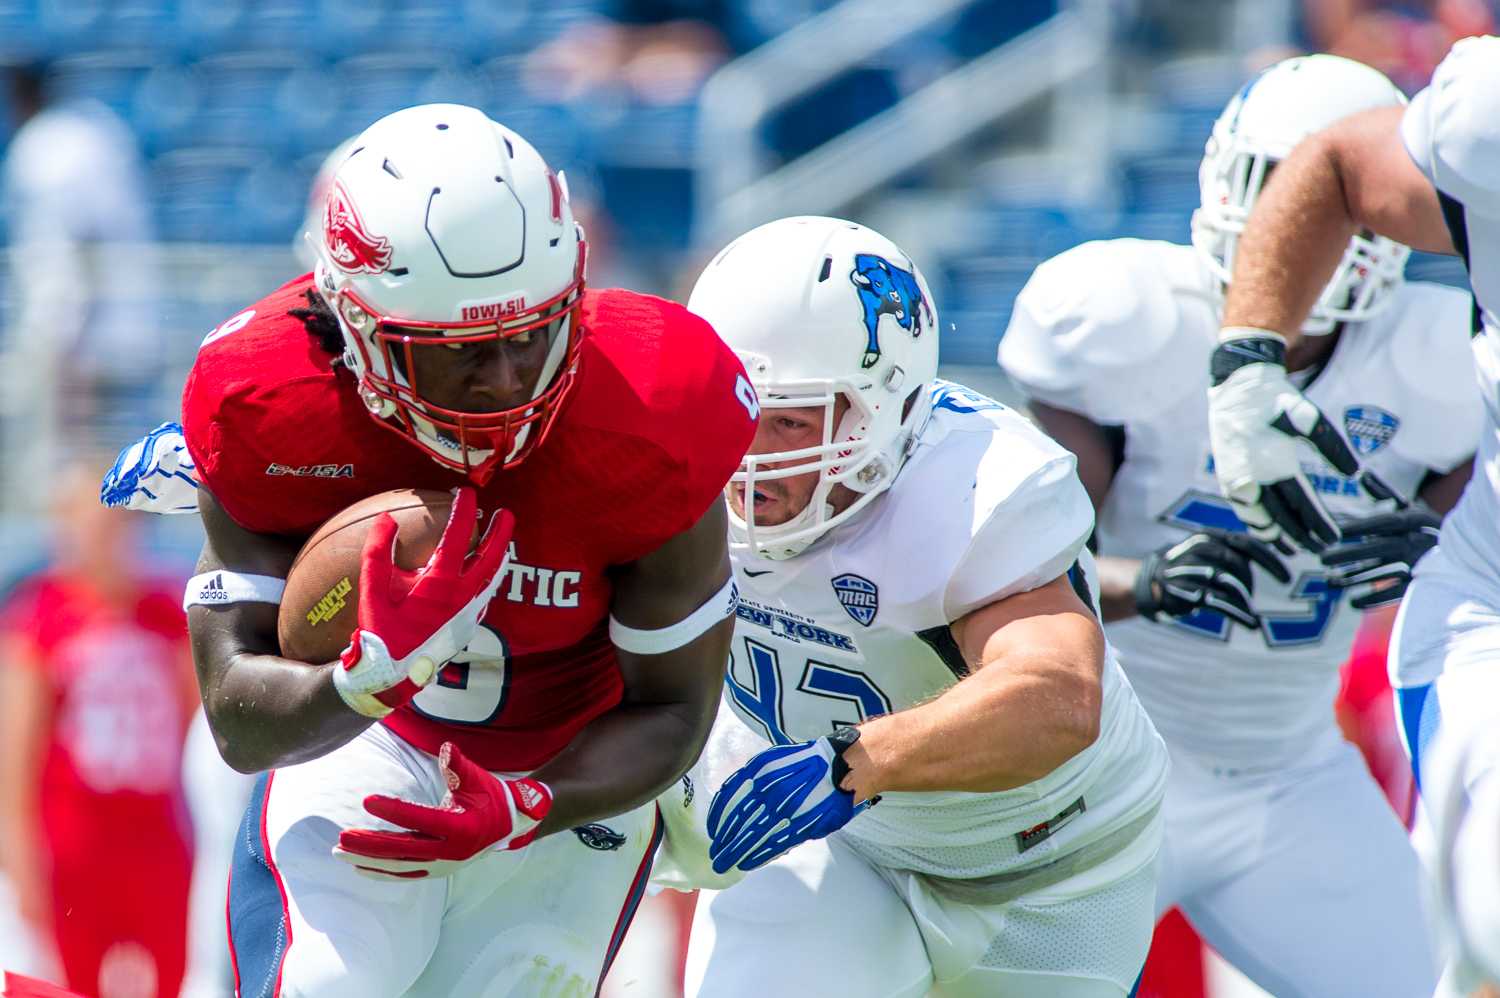 Greg (Buddy) Howell (9), a sophomore running back for the Owls, starts FAU’s opening drive Saturday with a 13 yard rush to the 38 yard line. Howell rushed for 78 yards with an average of 5.4 yards per carry. Max Jackson | Staff Phtotgrapher